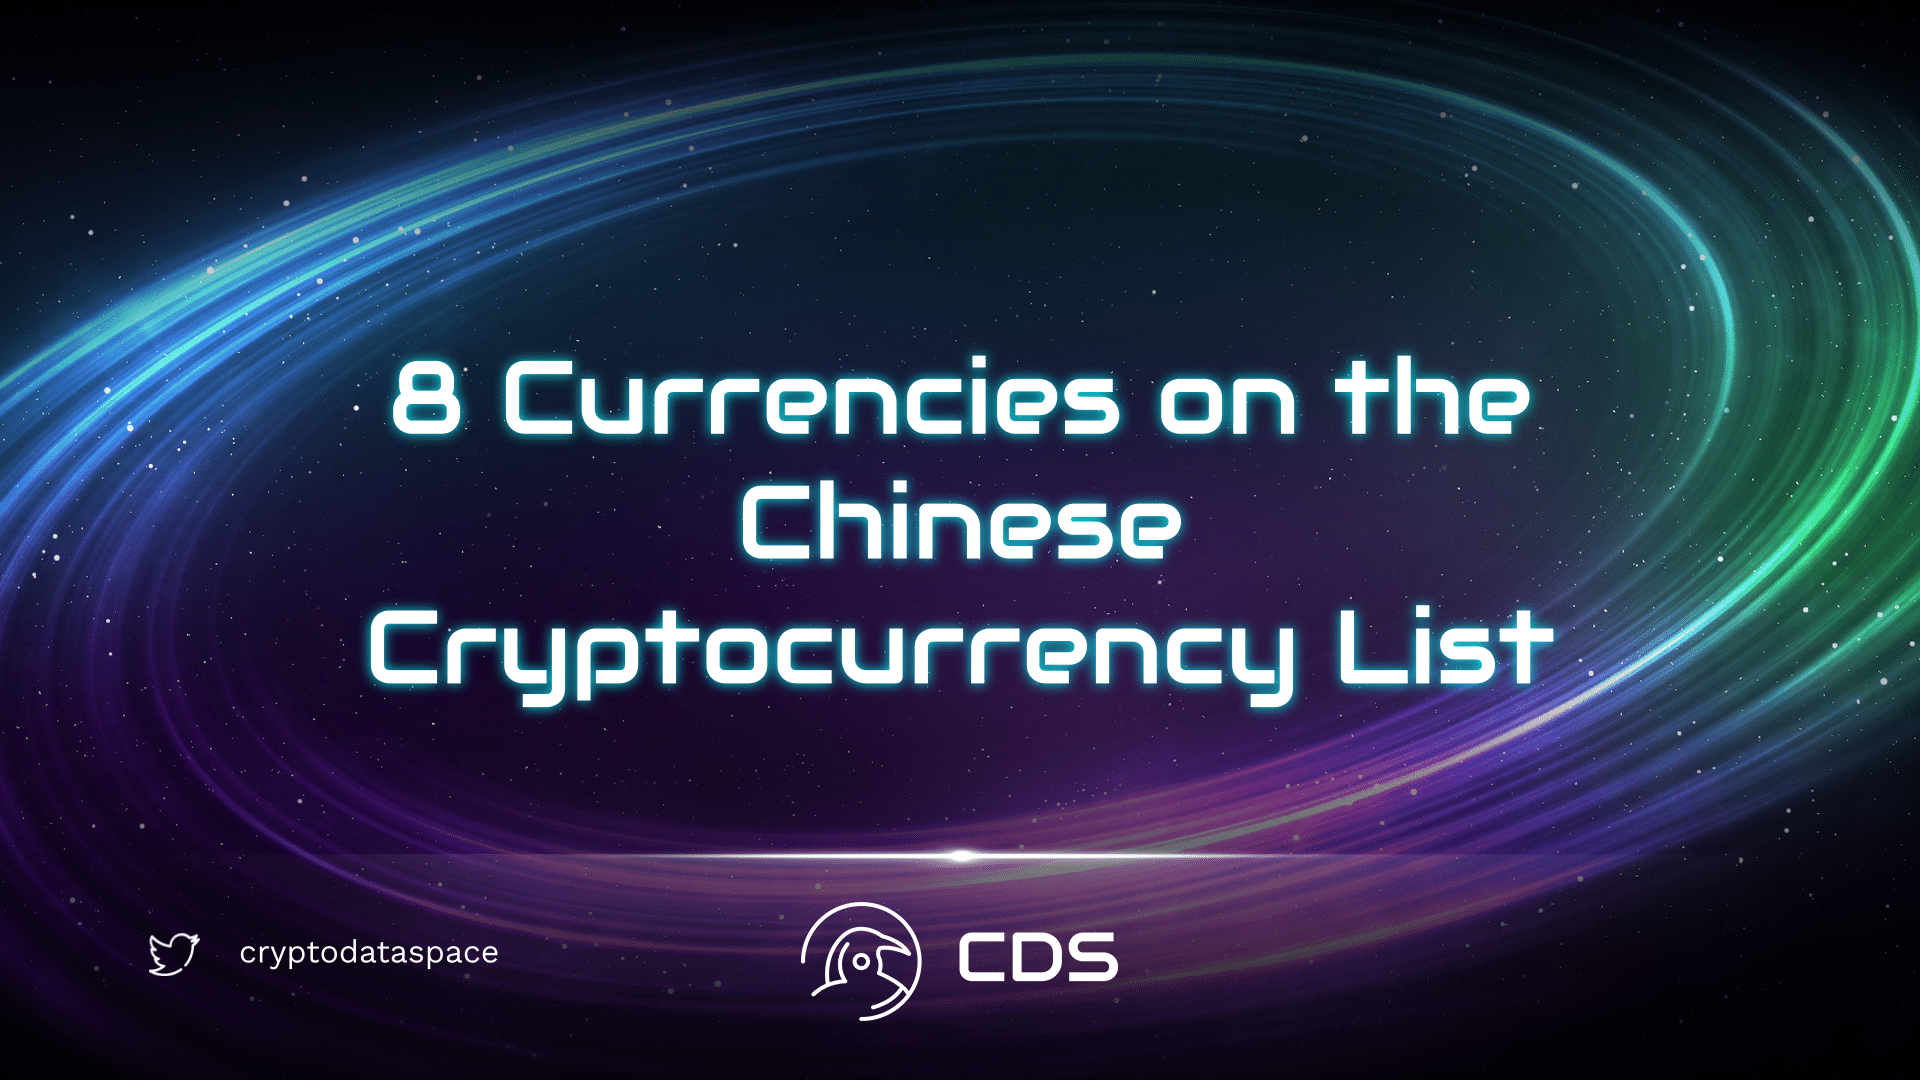 8 Currencies on the Chinese Cryptocurrency List